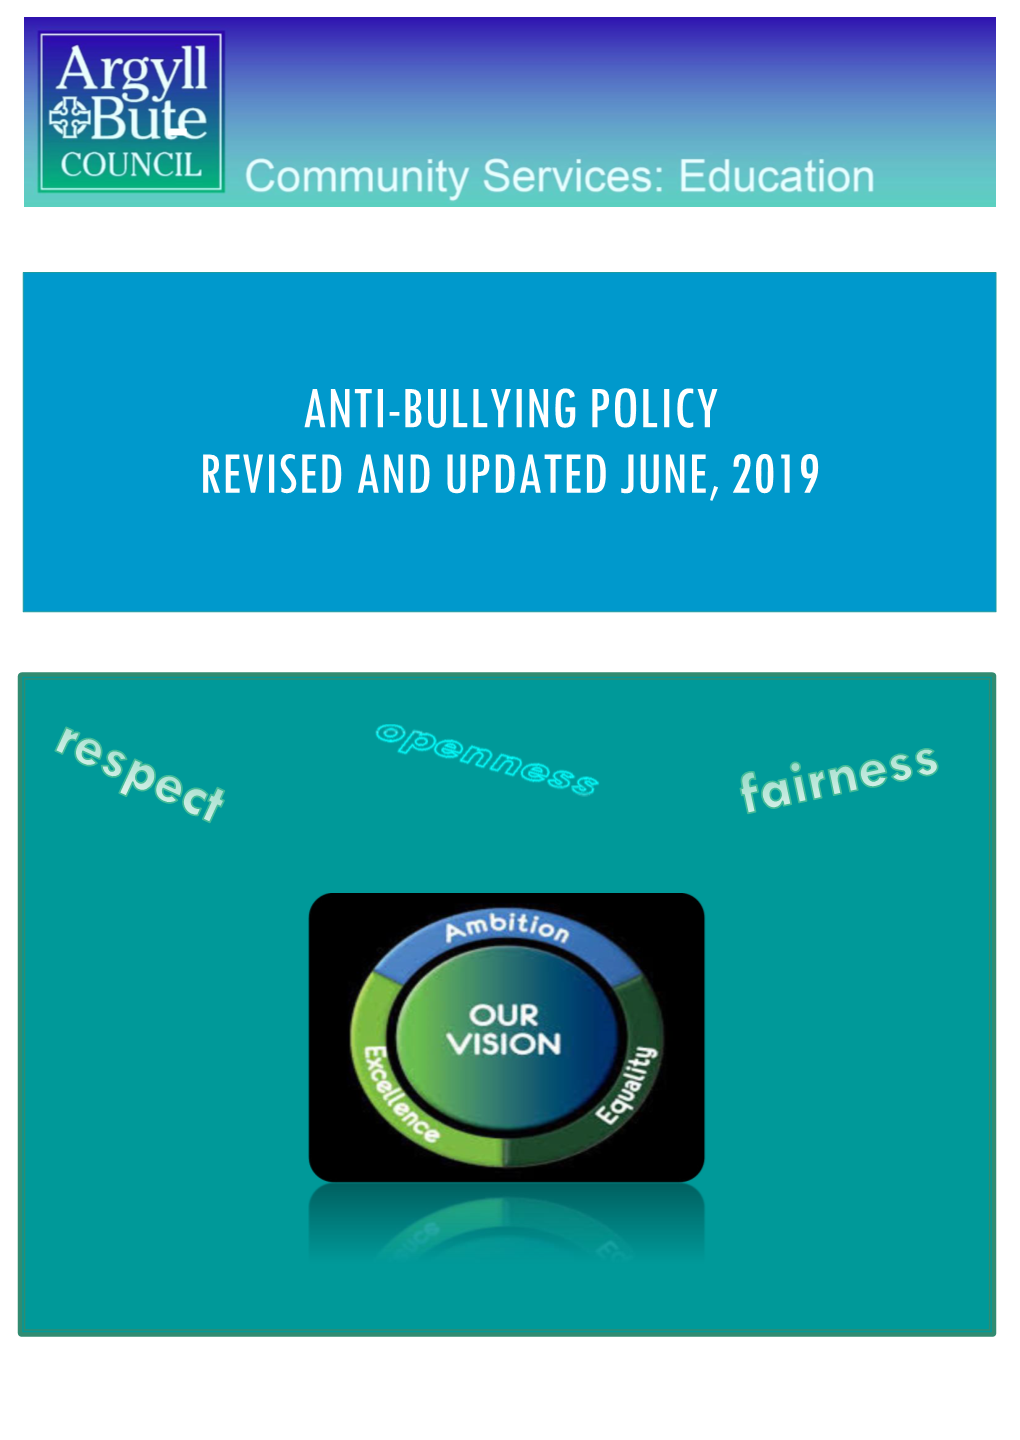 Anti-Bullying Policy Revised and Updated June, 2019